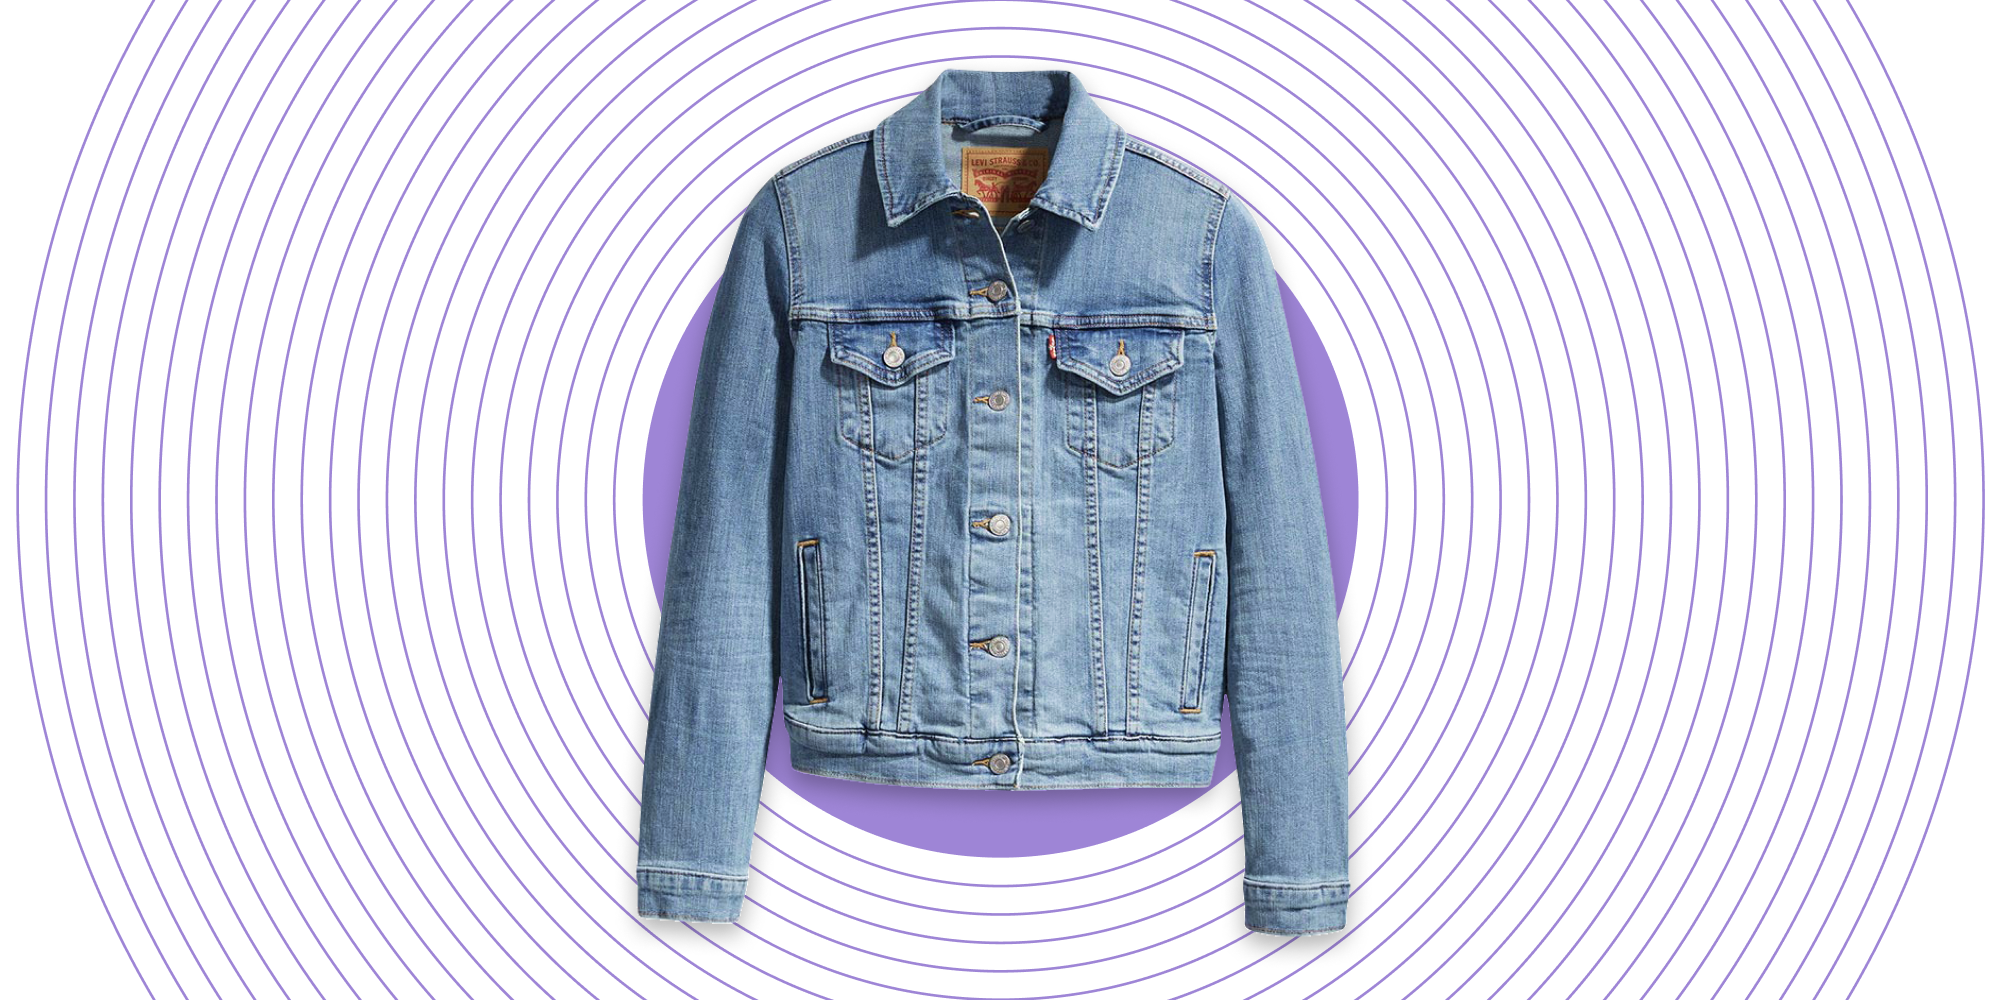 After countless trips to goodwill, i finally found a denim jacket! 1969 gap  icon denim jacket for $5. I wasn't even going to go thrifting today either  : r/ThriftStoreHauls